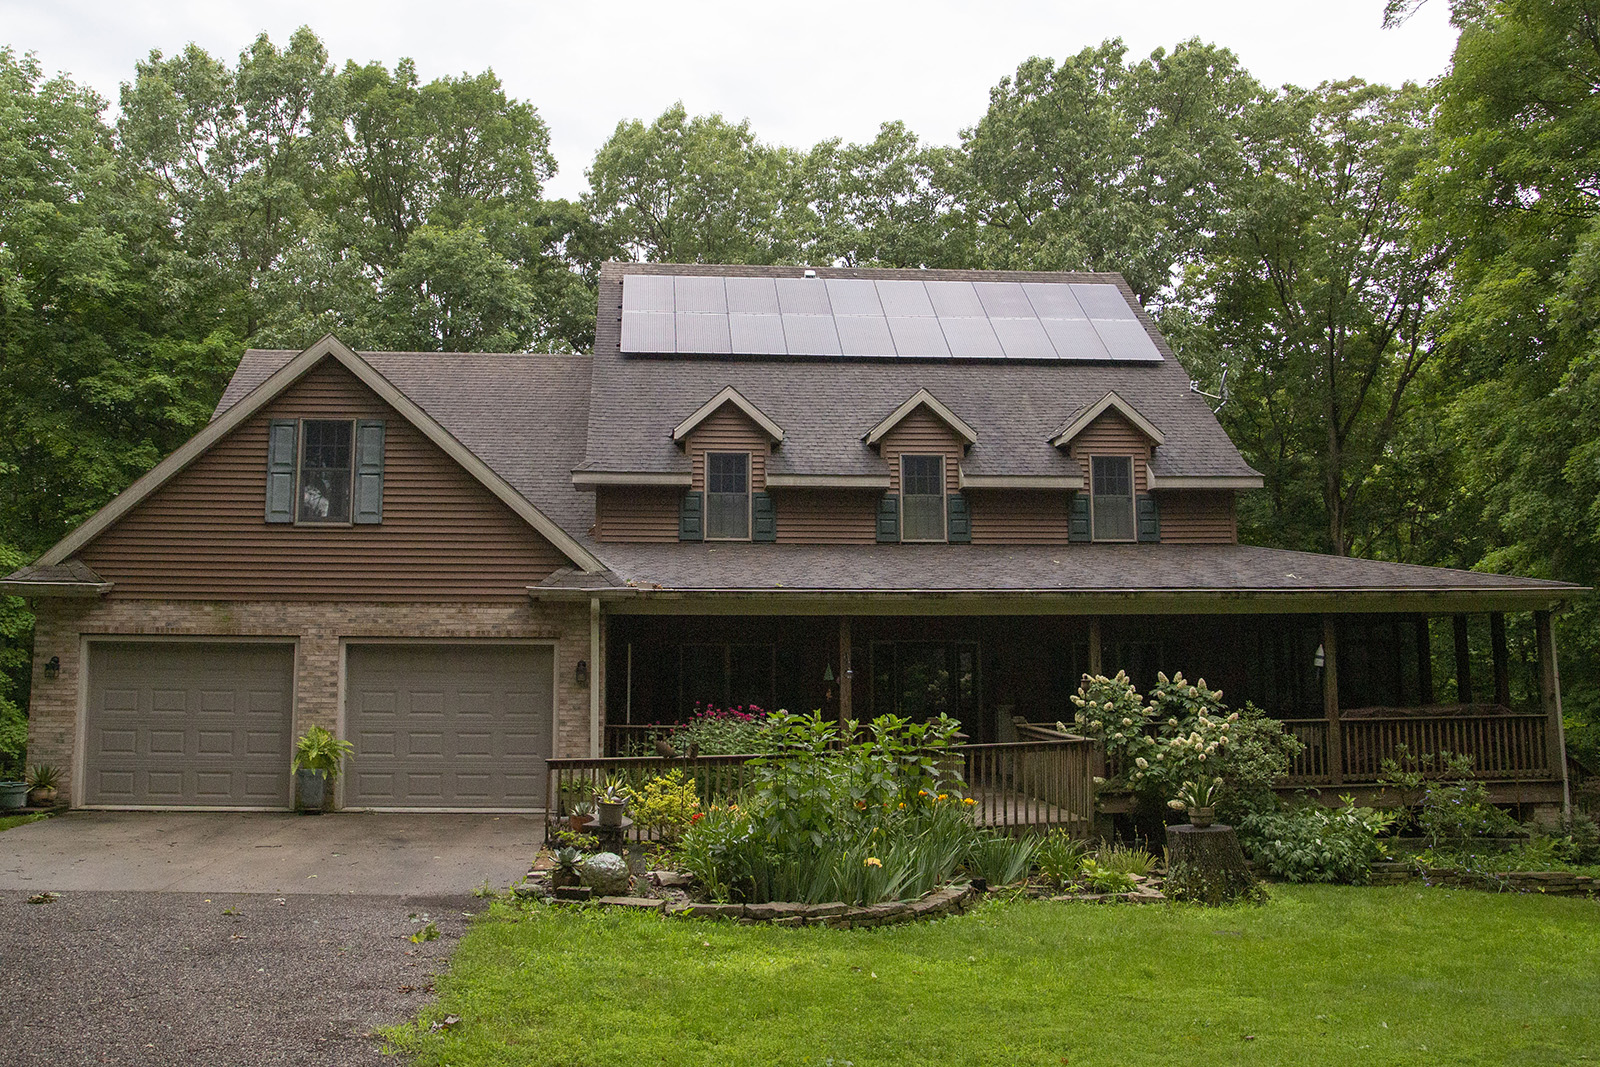 Residential rooftop solar panels in central Illinois. (Photo courtesy Coles-Moultrie Electric)